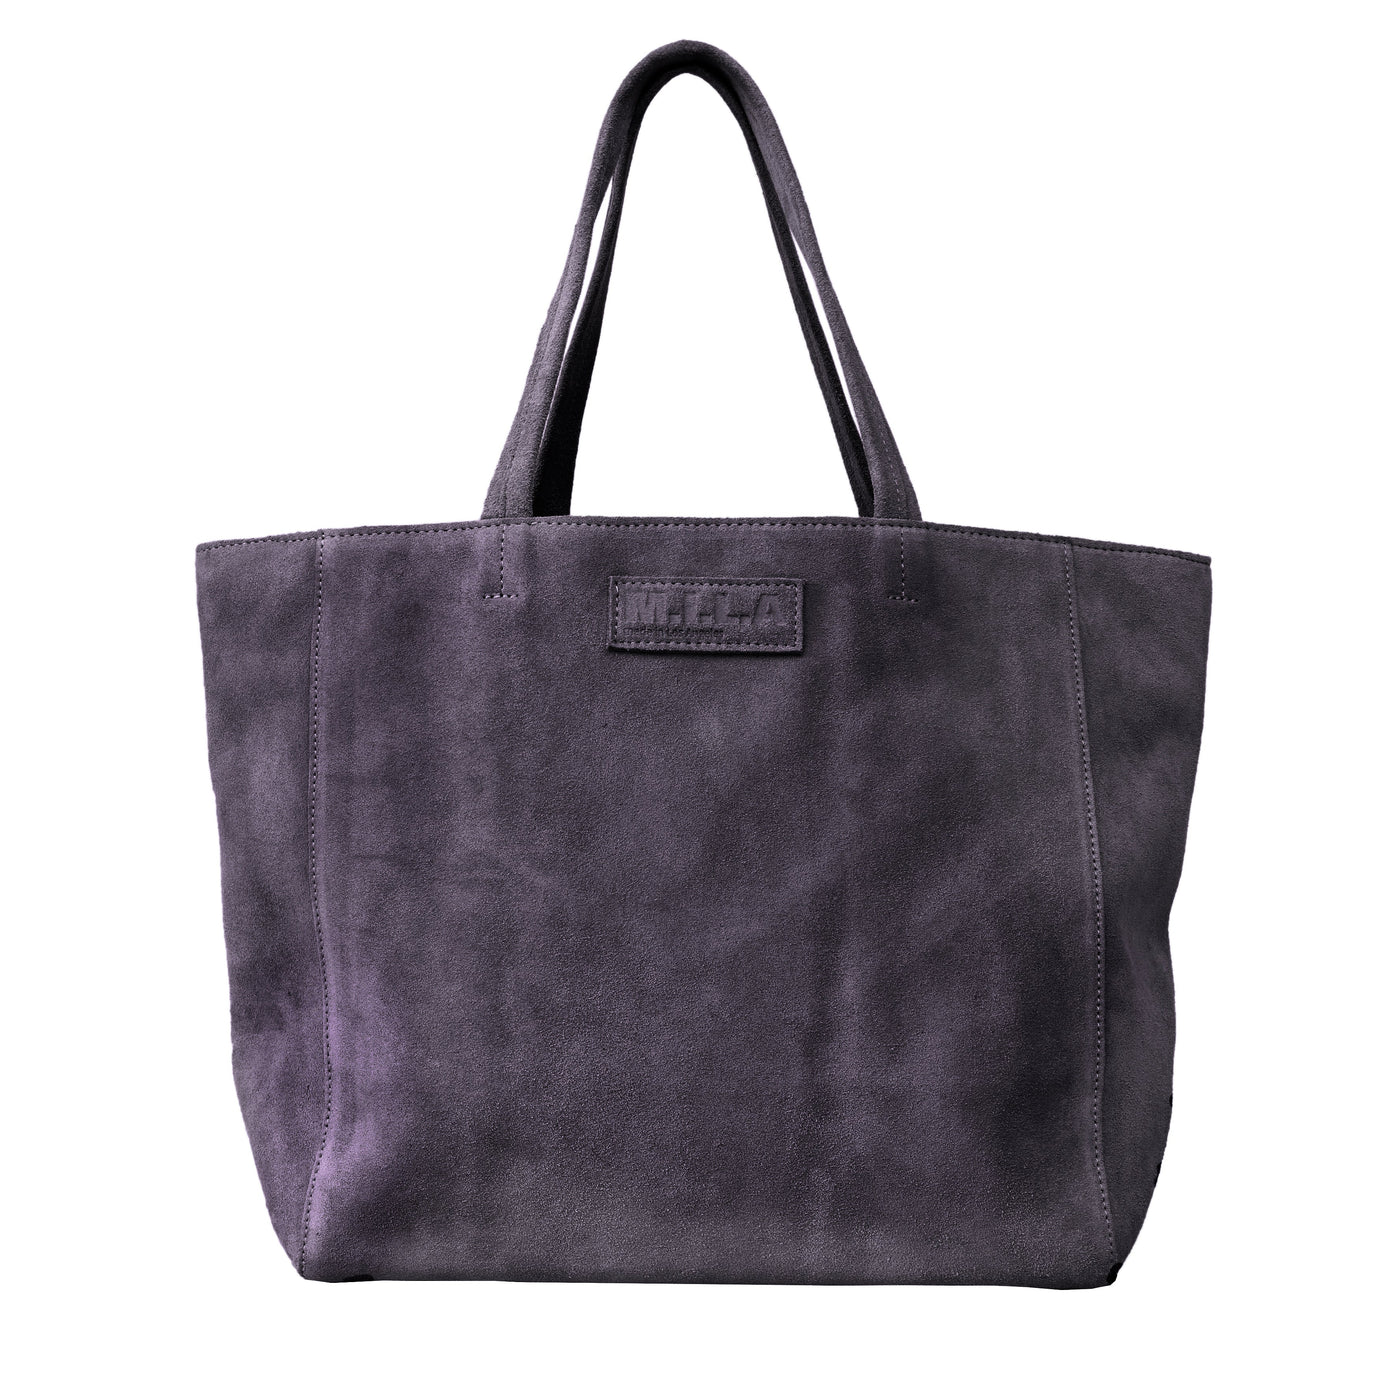 Black Suede Leather Tote Bag